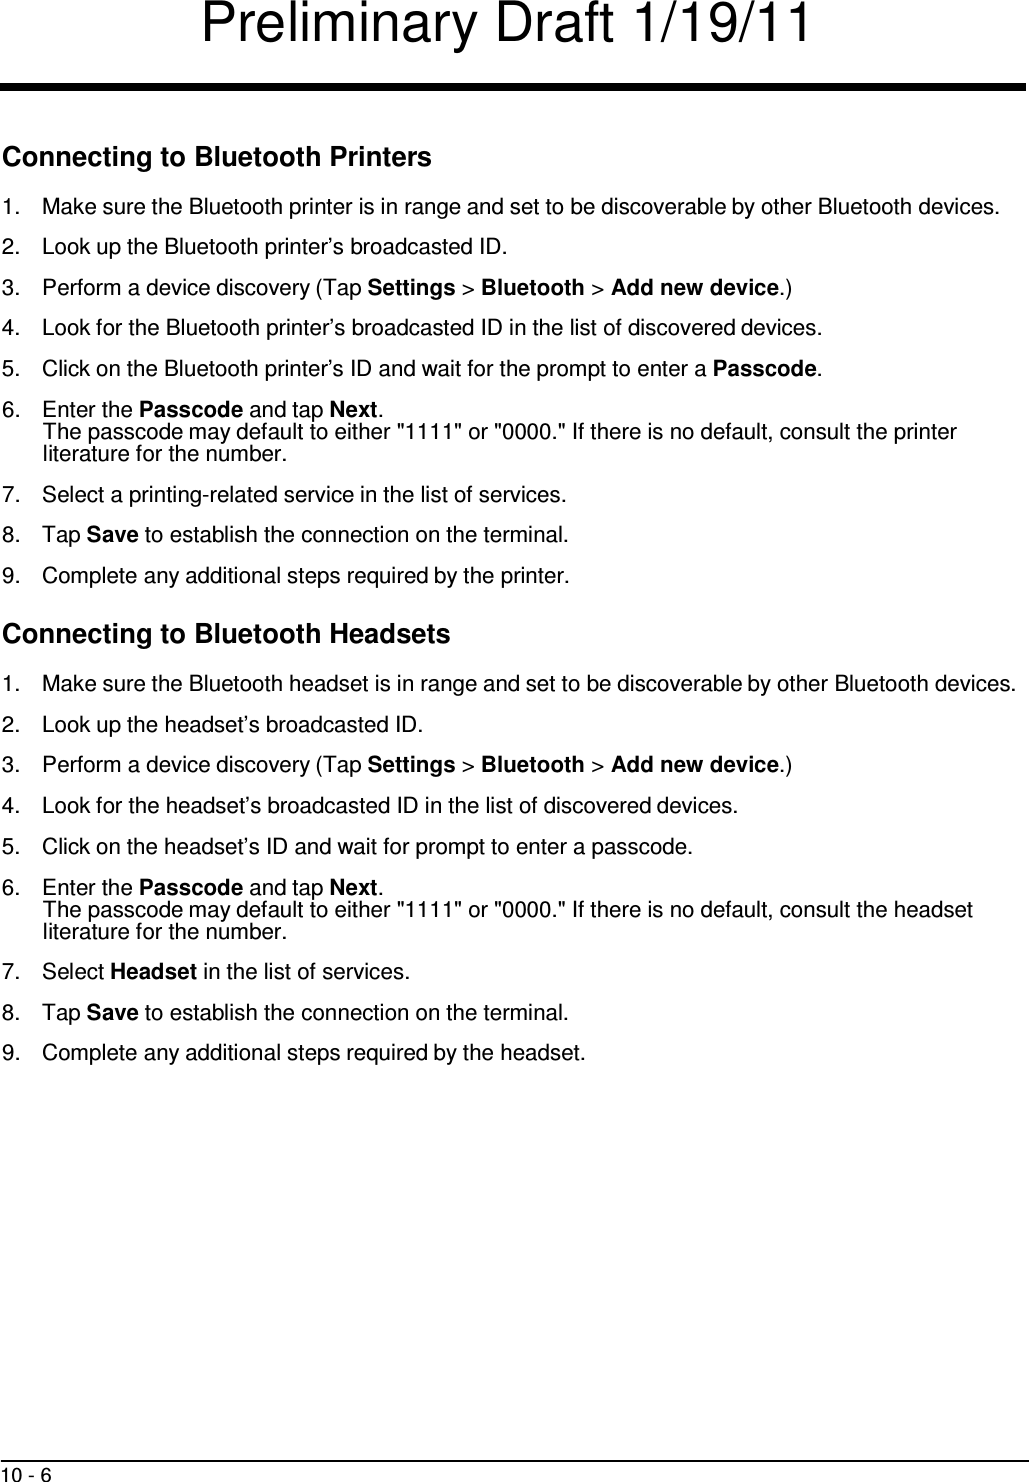 Preliminary Draft 1/19/11 10 - 6     Connecting to Bluetooth Printers  1.  Make sure the Bluetooth printer is in range and set to be discoverable by other Bluetooth devices.  2.  Look up the Bluetooth printer’s broadcasted ID.  3.  Perform a device discovery (Tap Settings &gt; Bluetooth &gt; Add new device.)  4.  Look for the Bluetooth printer’s broadcasted ID in the list of discovered devices.  5.  Click on the Bluetooth printer’s ID and wait for the prompt to enter a Passcode.  6.  Enter the Passcode and tap Next. The passcode may default to either &quot;1111&quot; or &quot;0000.&quot; If there is no default, consult the printer literature for the number.  7.  Select a printing-related service in the list of services.  8.  Tap Save to establish the connection on the terminal.  9.  Complete any additional steps required by the printer.  Connecting to Bluetooth Headsets  1.  Make sure the Bluetooth headset is in range and set to be discoverable by other Bluetooth devices.  2.  Look up the headset’s broadcasted ID.  3.  Perform a device discovery (Tap Settings &gt; Bluetooth &gt; Add new device.)  4.  Look for the headset’s broadcasted ID in the list of discovered devices.  5.  Click on the headset’s ID and wait for prompt to enter a passcode.  6.  Enter the Passcode and tap Next. The passcode may default to either &quot;1111&quot; or &quot;0000.&quot; If there is no default, consult the headset literature for the number.  7.  Select Headset in the list of services.  8.  Tap Save to establish the connection on the terminal.  9.  Complete any additional steps required by the headset. 